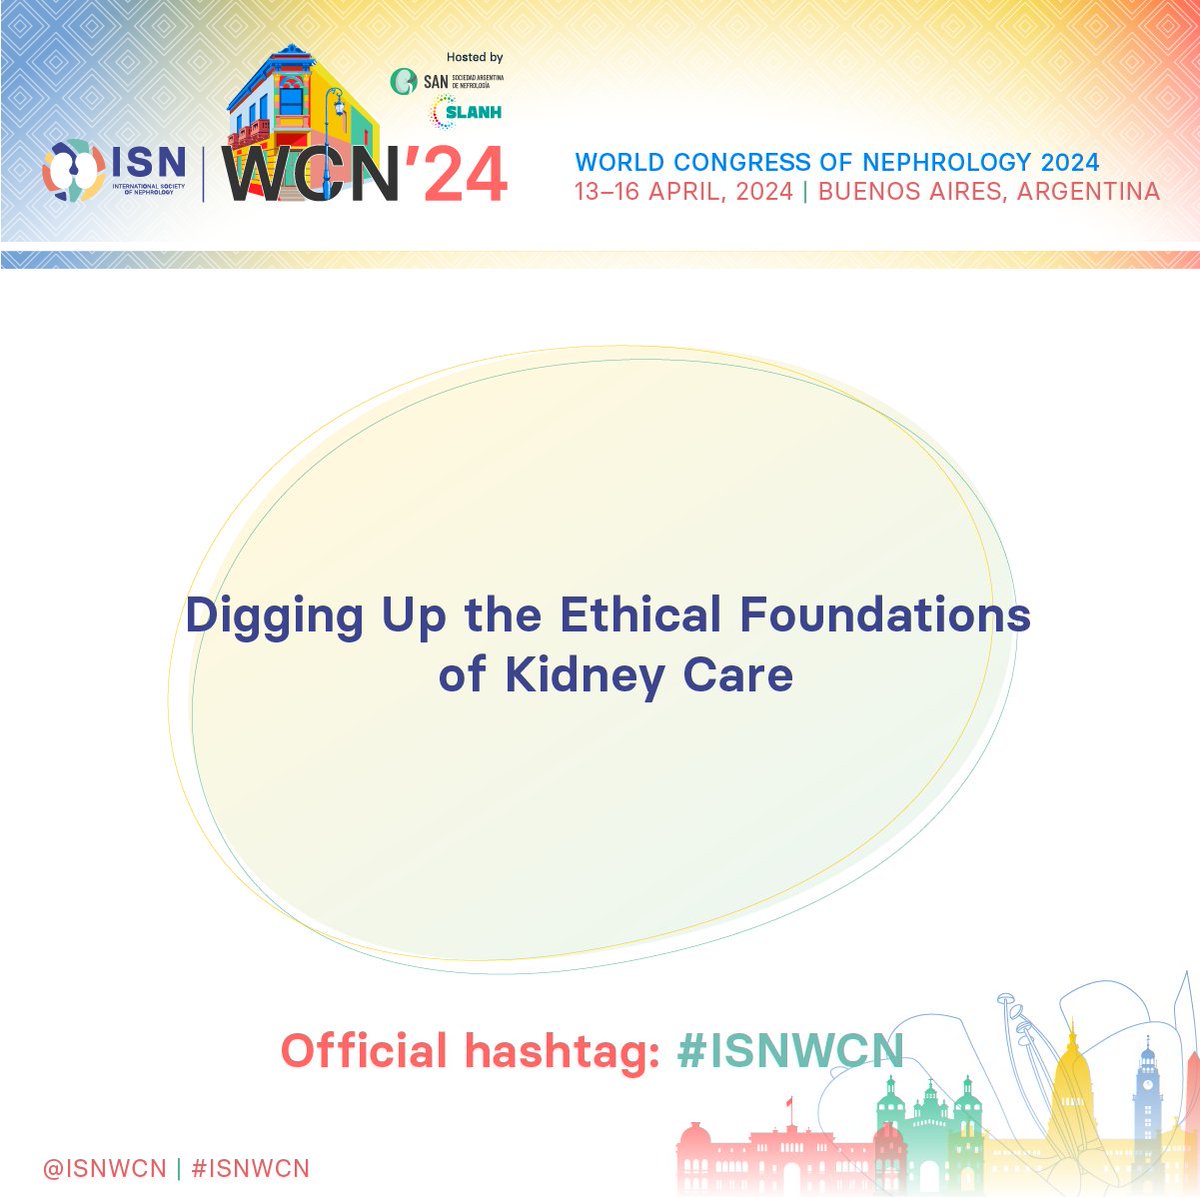 Interested in #ethics & #kidneys? I'm thrilled 2b co-chairing a session @ISNWCN digging up & renewing ethical foundations of kidney care - exploring supported decision-making, cultural safety & role of evidence in ethics! Join us 🗓️April 15, 12:15 PM #BuenosAires, Argentina🇦🇷